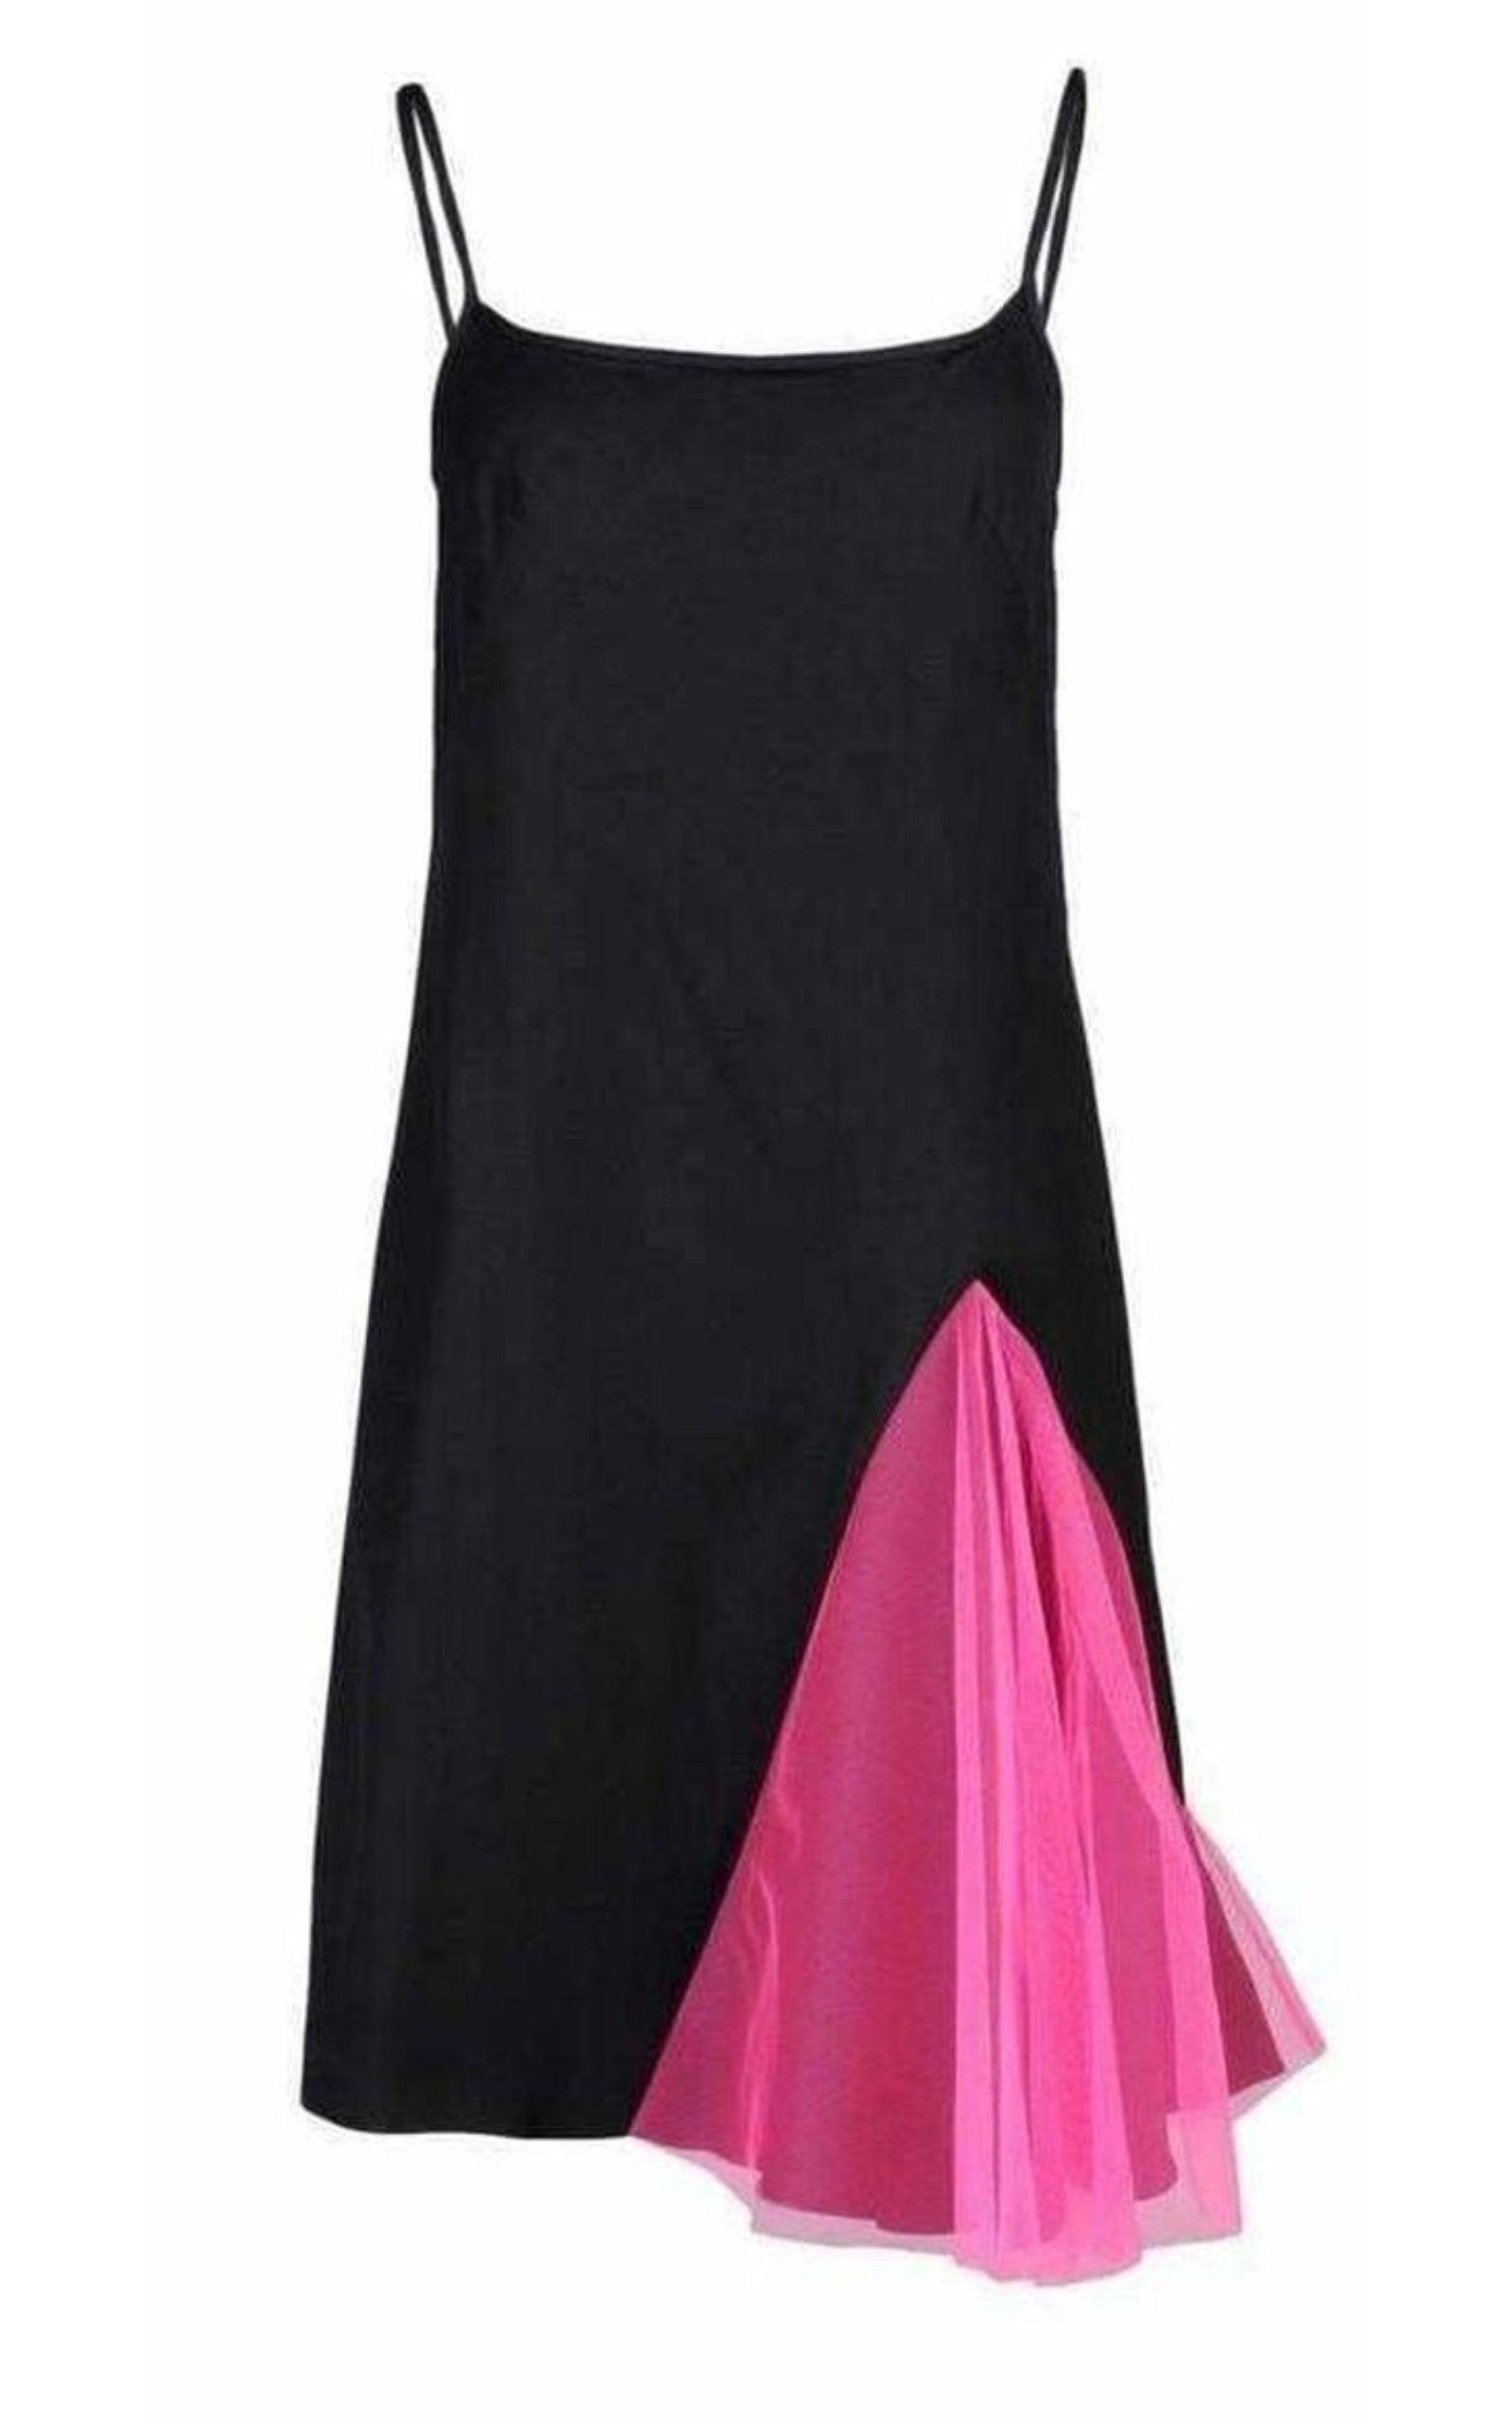  Christopher KaneBlack Strappy Dress With Neon Pink Godets - Runway Catalog